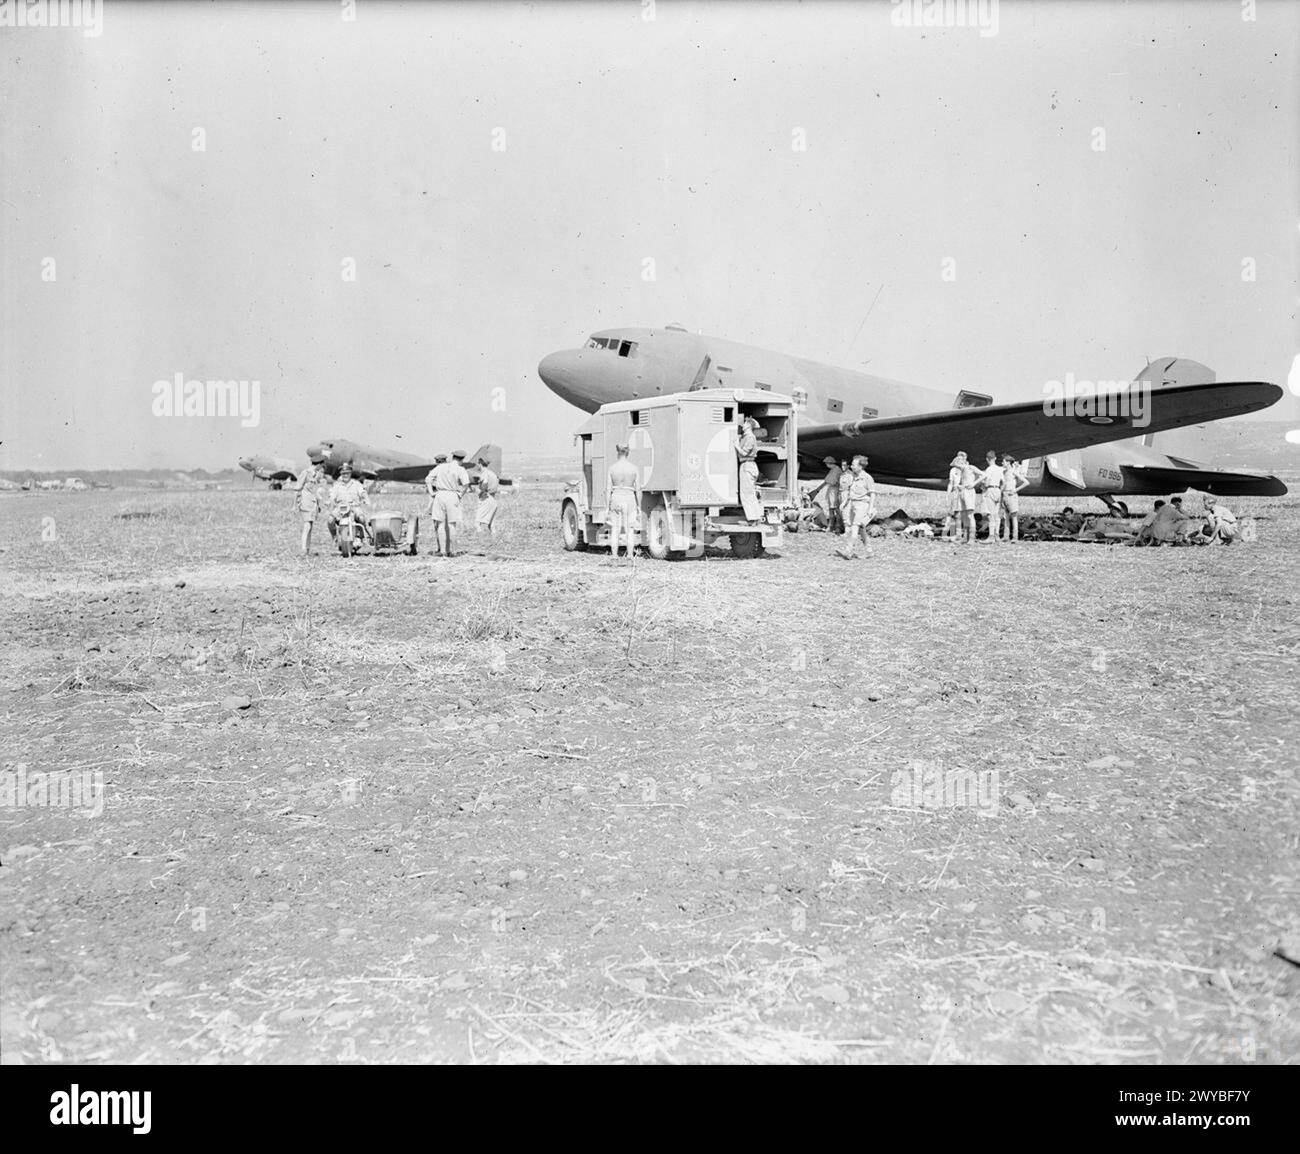 ROYAL AIR FORCE: ITALY, THE BALKANS AND SOUTH-EAST EUROPE, 1942-1945. - A British Army ambulance pulls up in front of a line of Douglas Dakota Mark IIIs at Catania, Sicily, FD986 , Stock Photo